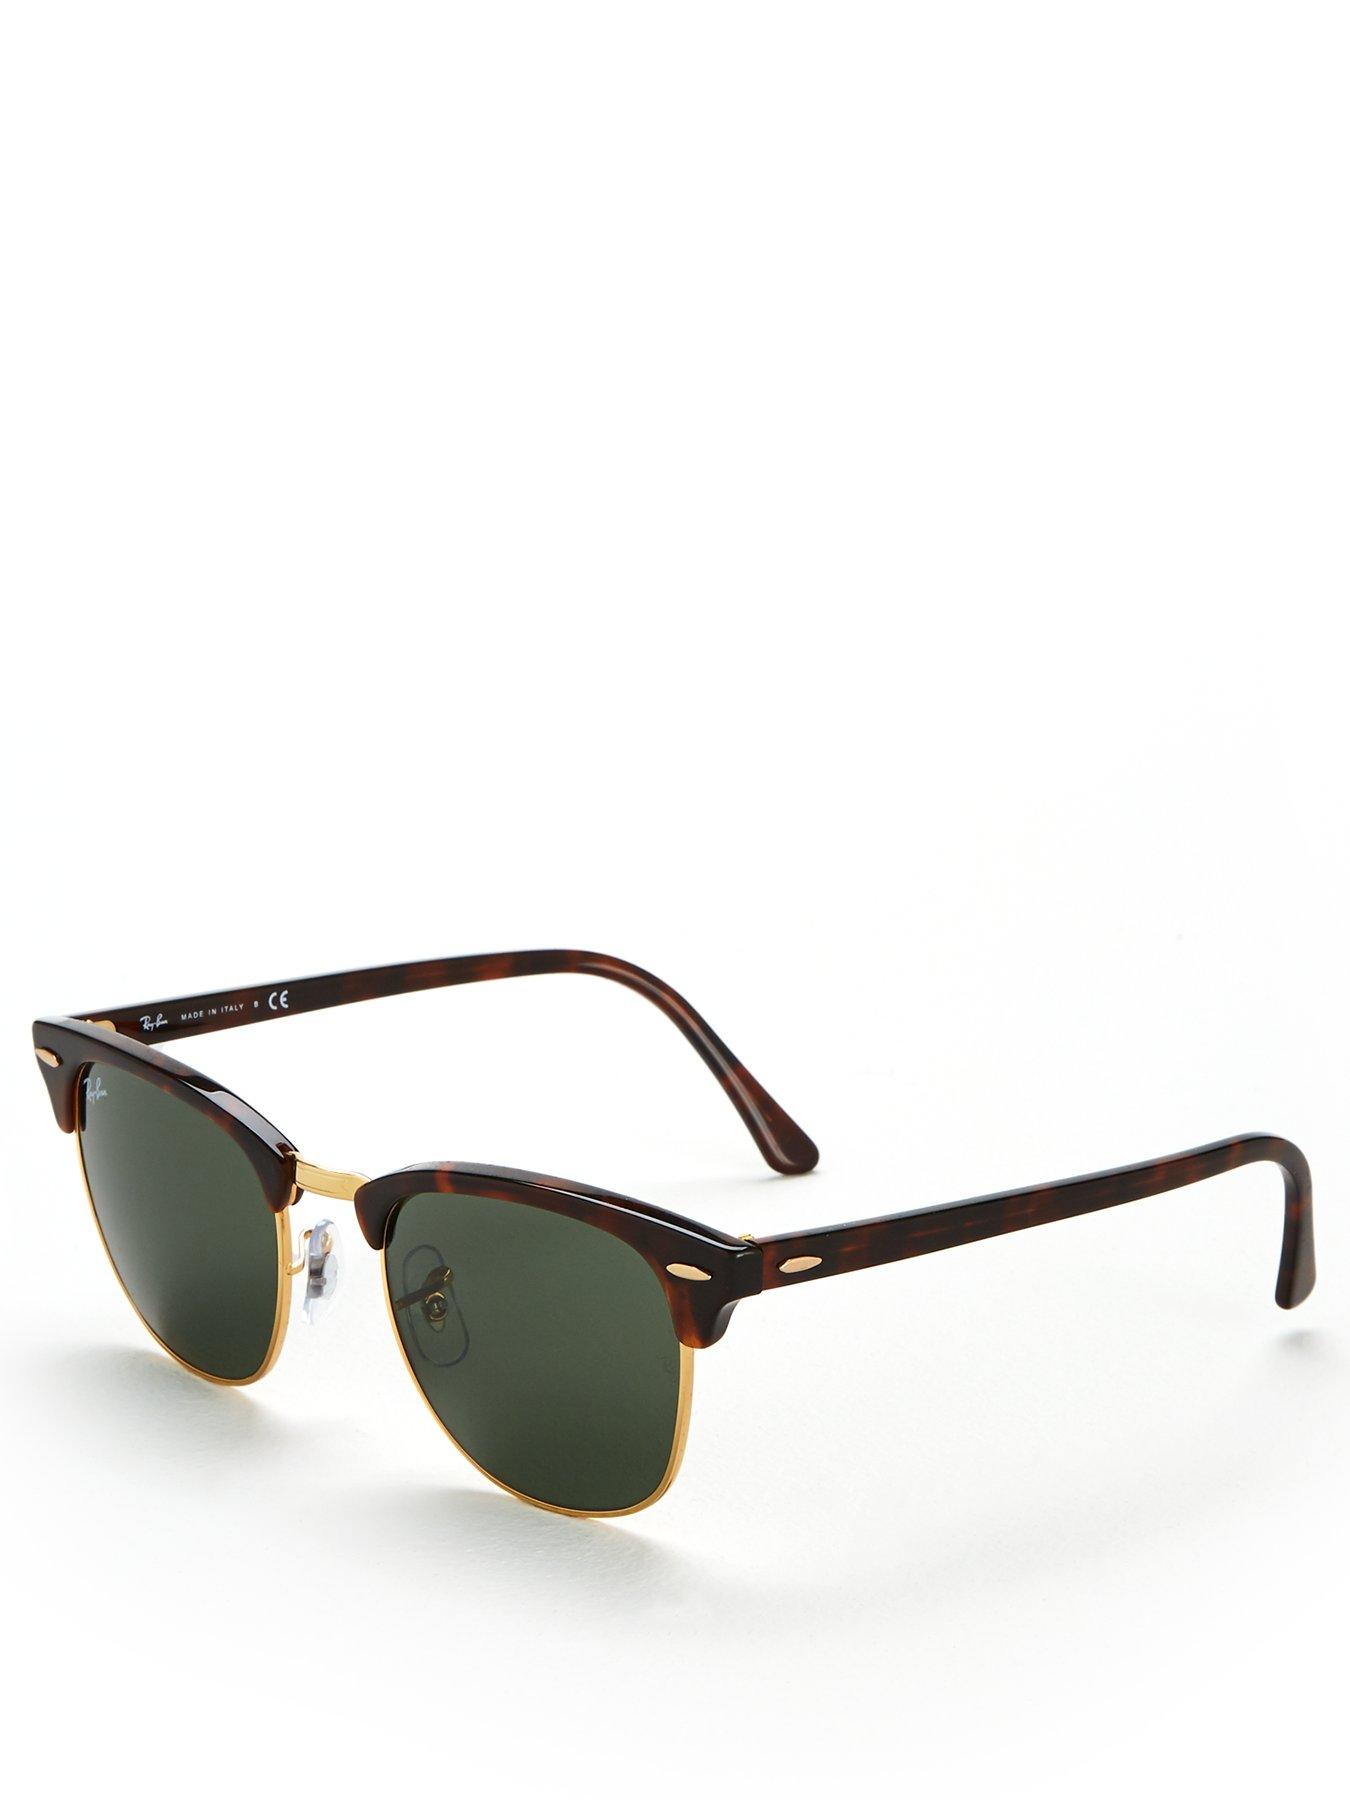 Ray-Ban Clubmaster Sunglasses - Tortoise | very.co.uk